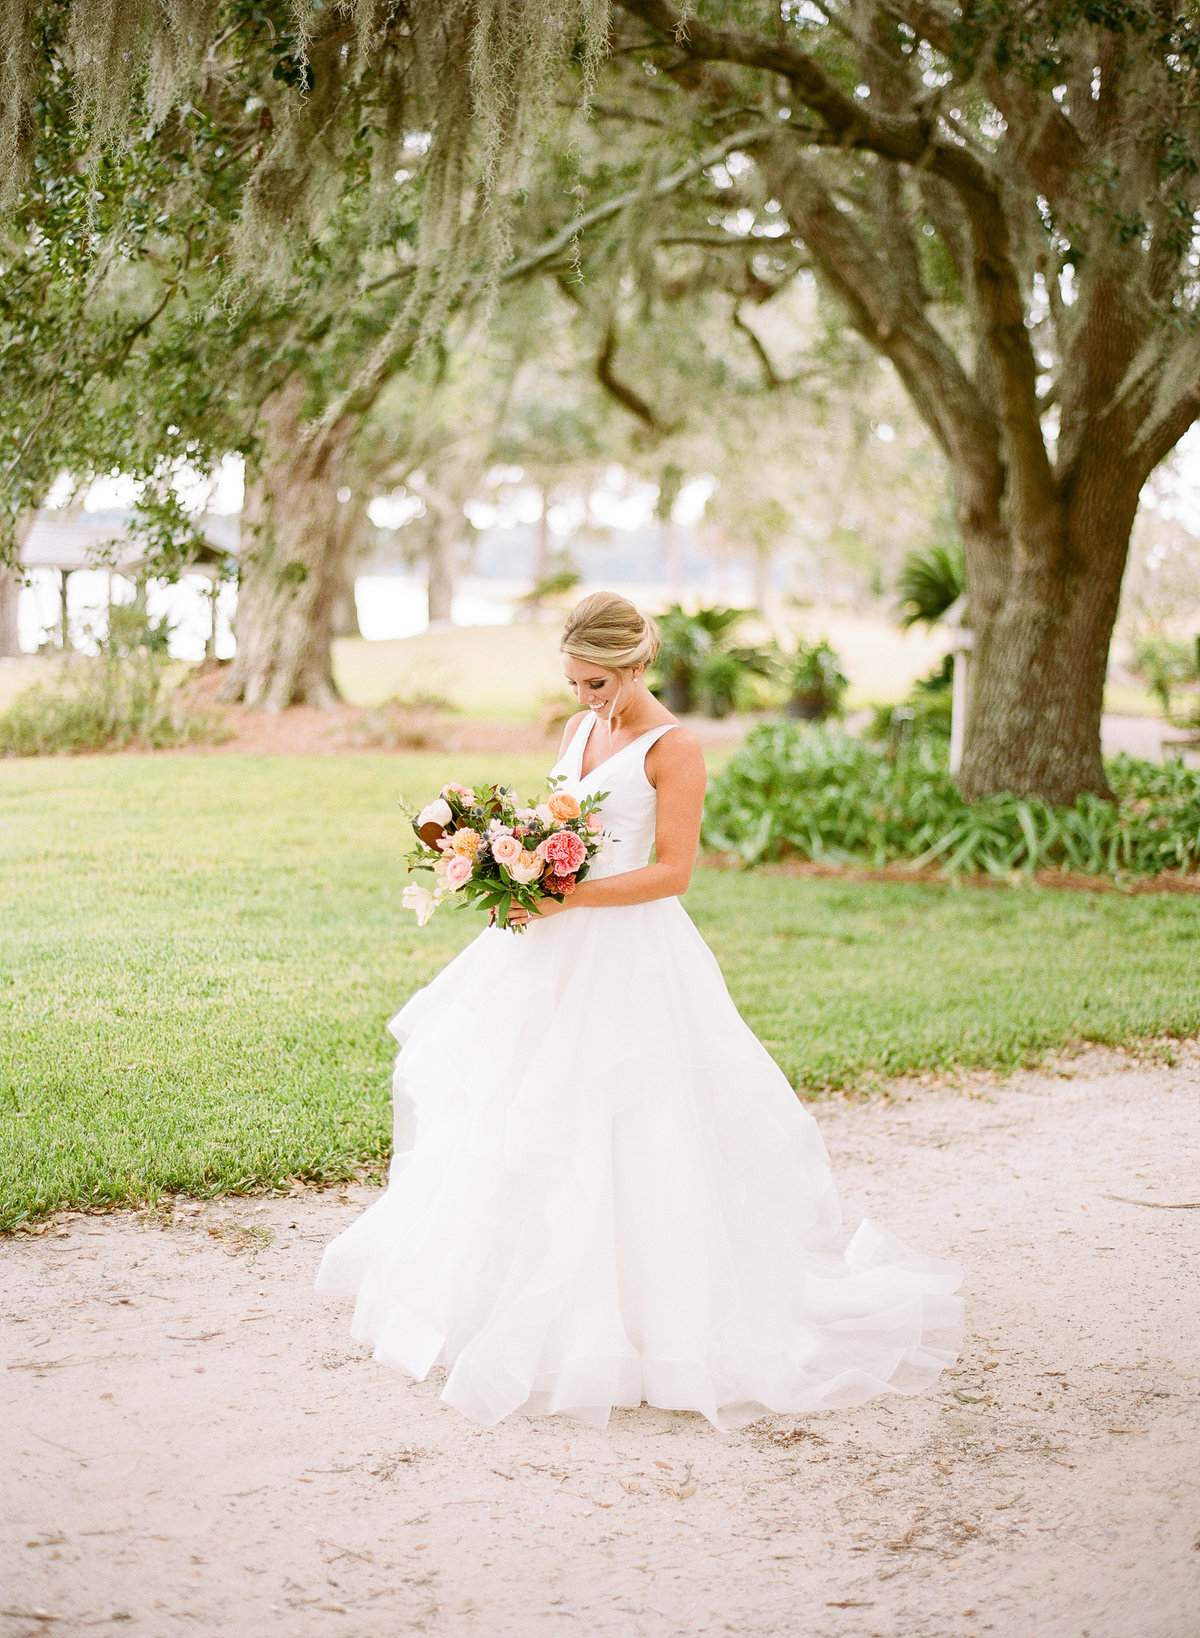 Bride Alexis in Modern Trousseau Ball Gown with Colorful bouquet from Branch Design Studio Charleston Wedding